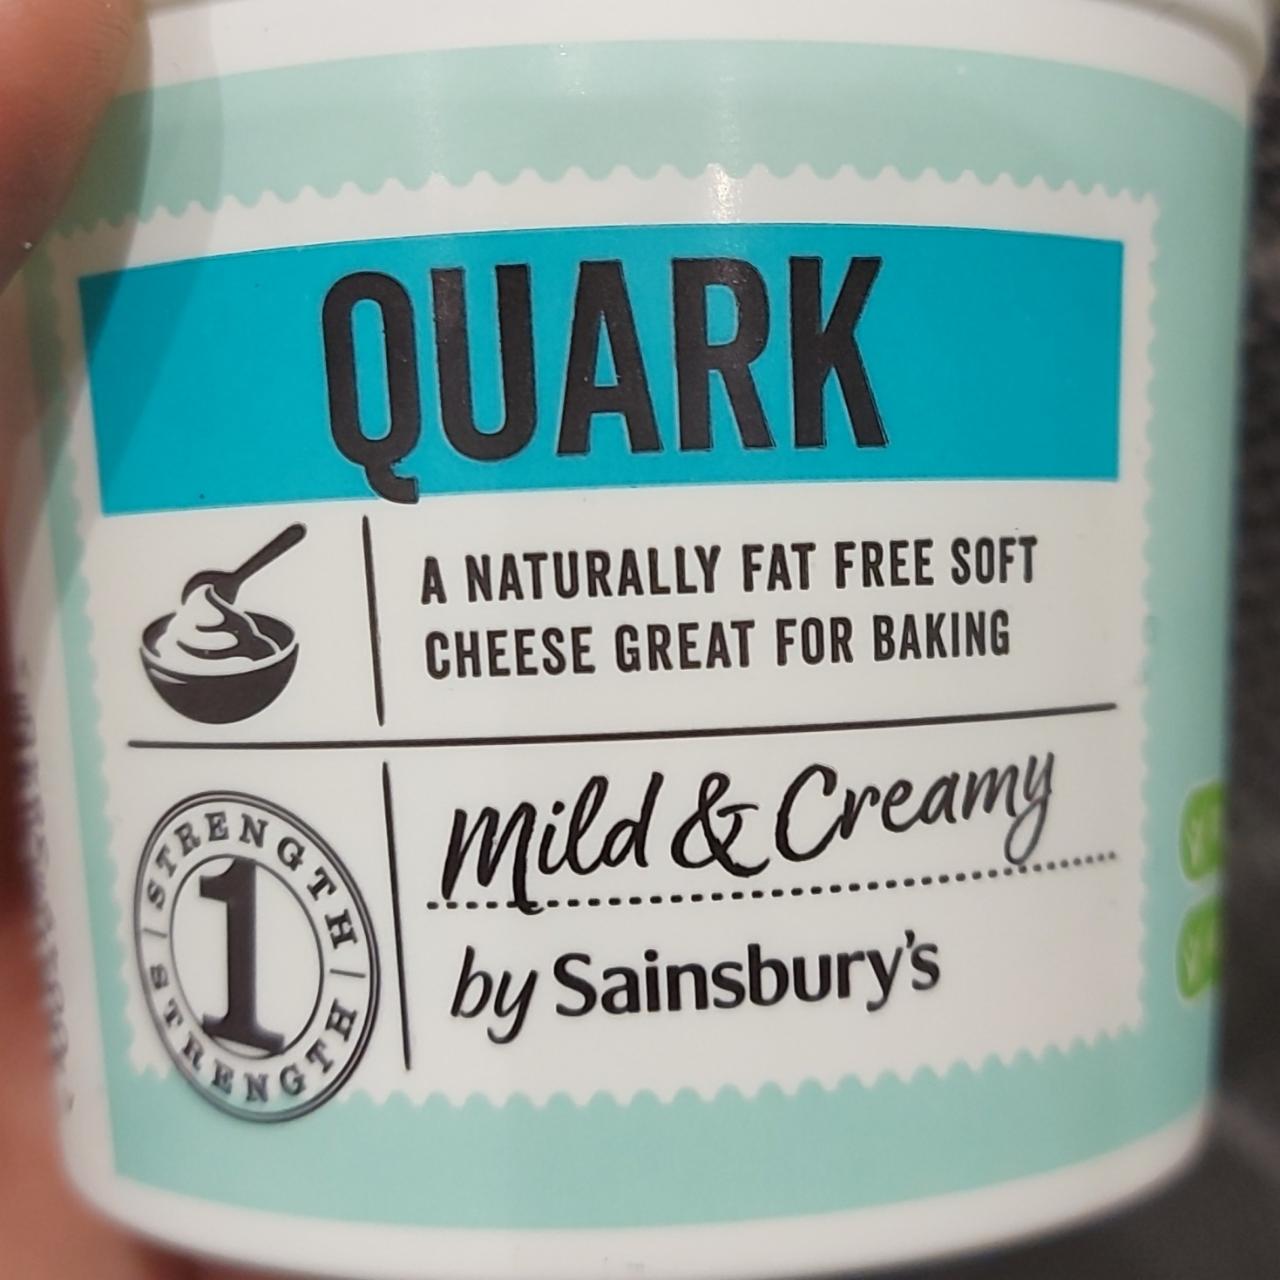 Fotografie - Quark a naturally fat free soft cheese by Sainsbury's